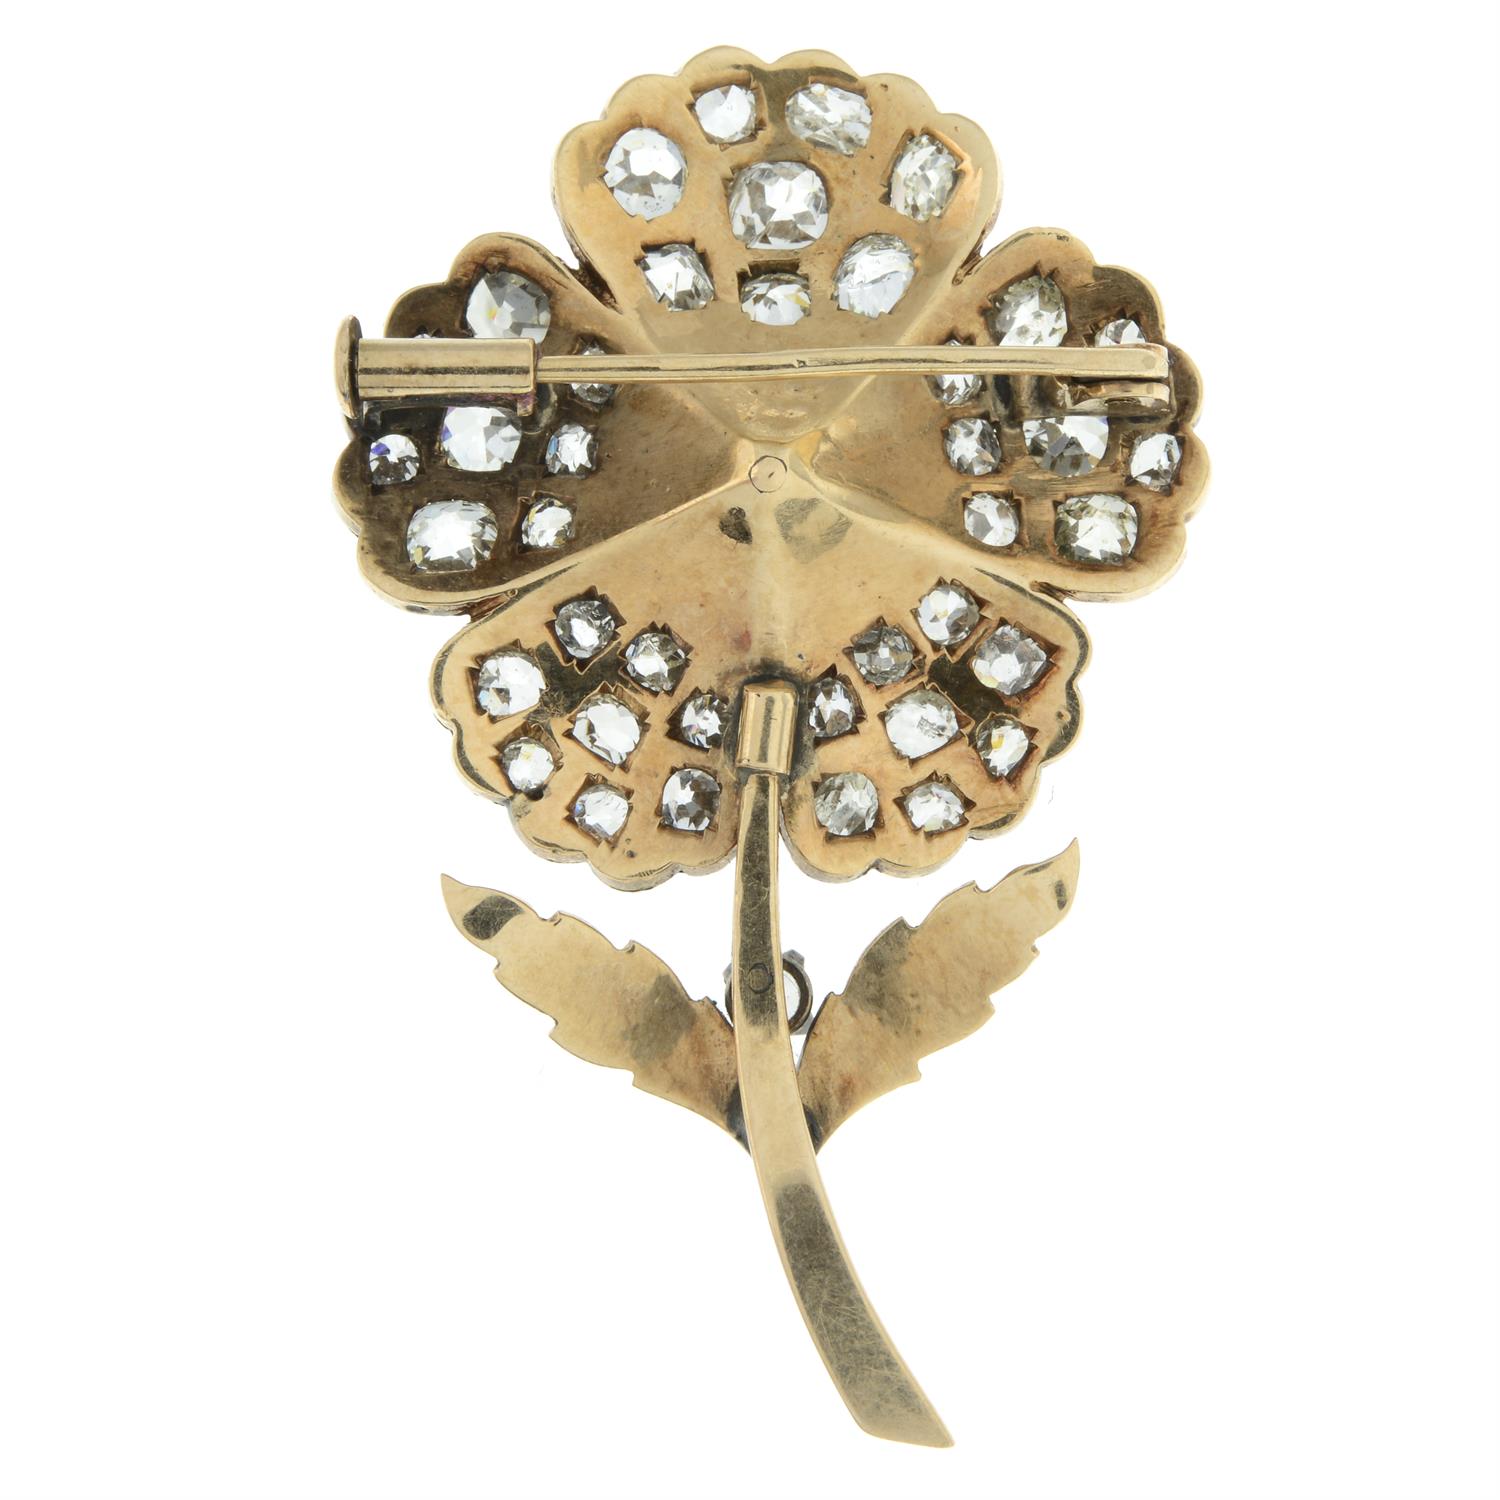 Late 19th century old-cut diamond and enamel floral brooch - Image 3 of 5